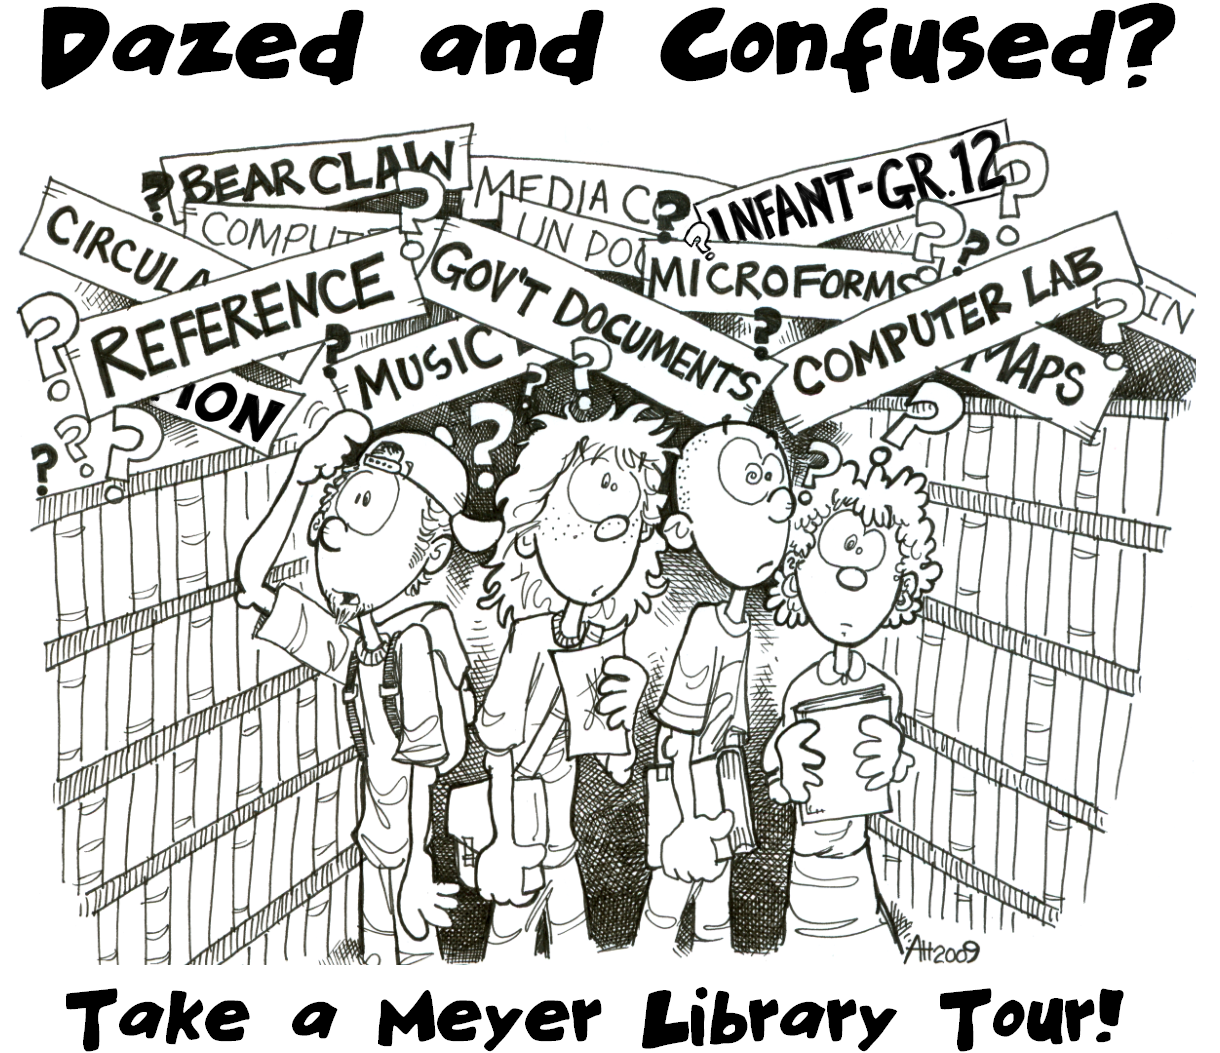 Cartoon drawing of dazed and confused patrons. Captioned with Take a Library Tour.